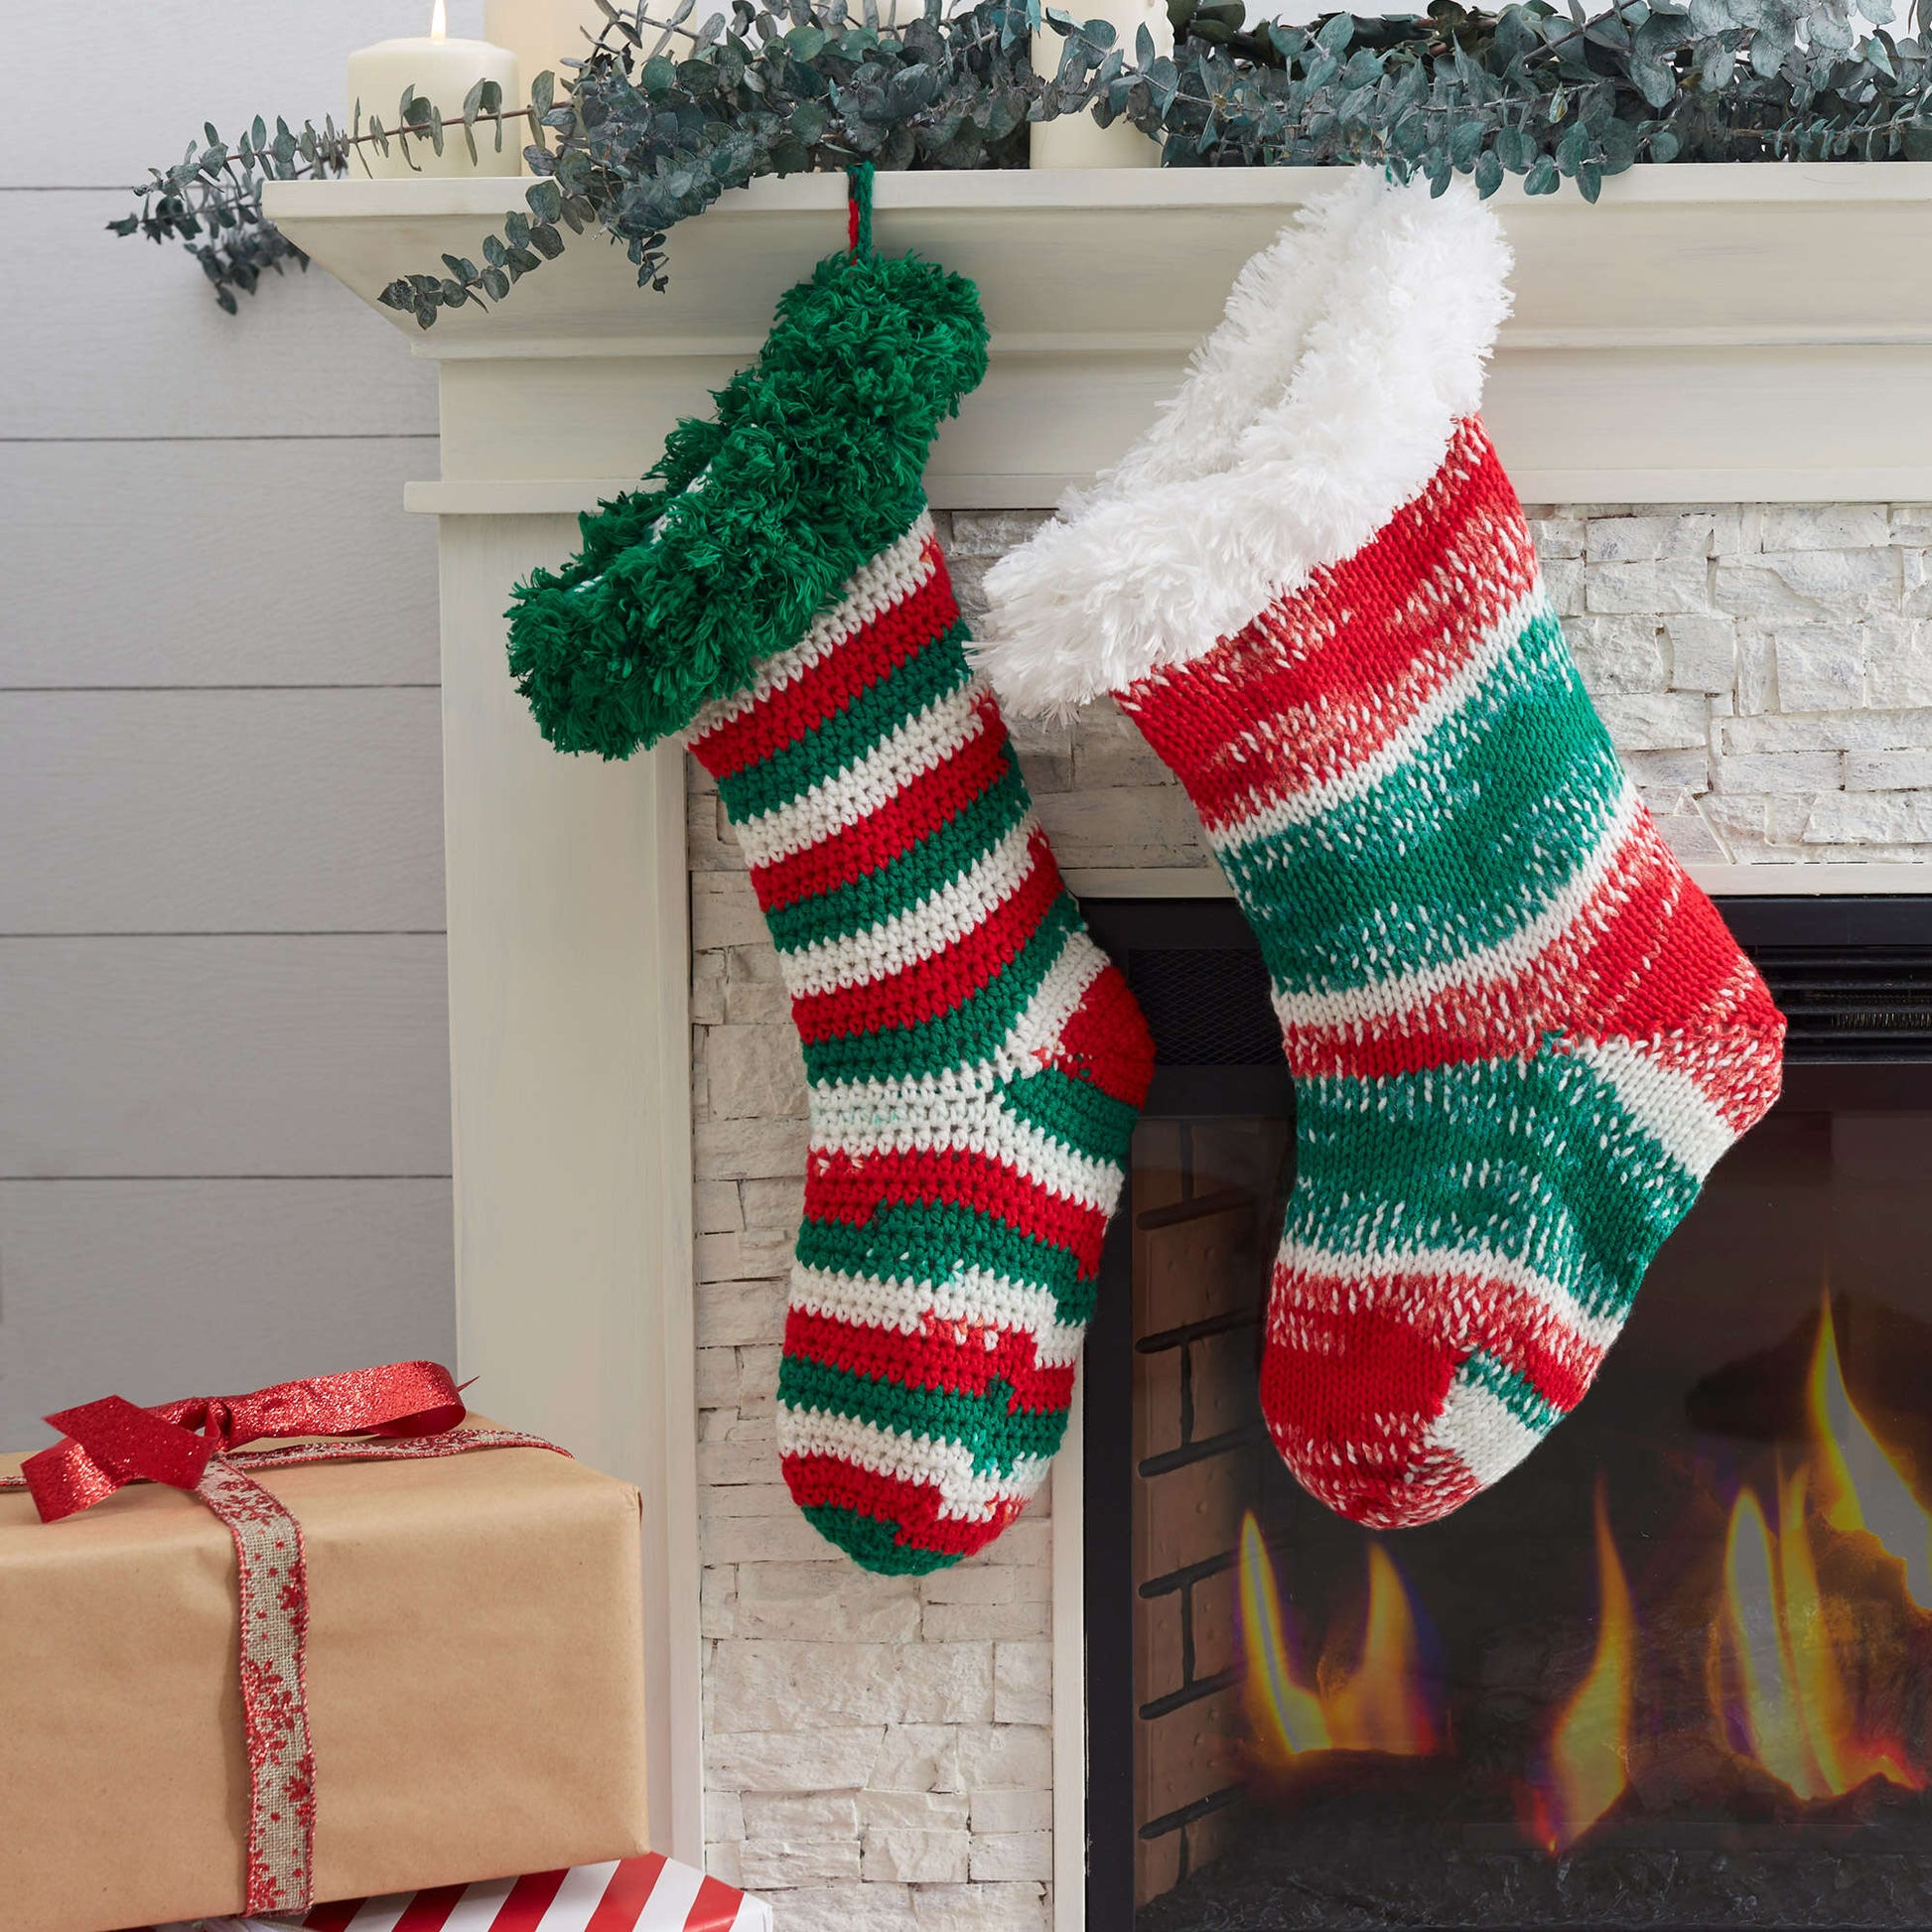 Free Red Heart Knit Christmas Stocking With Fur Trim Pattern